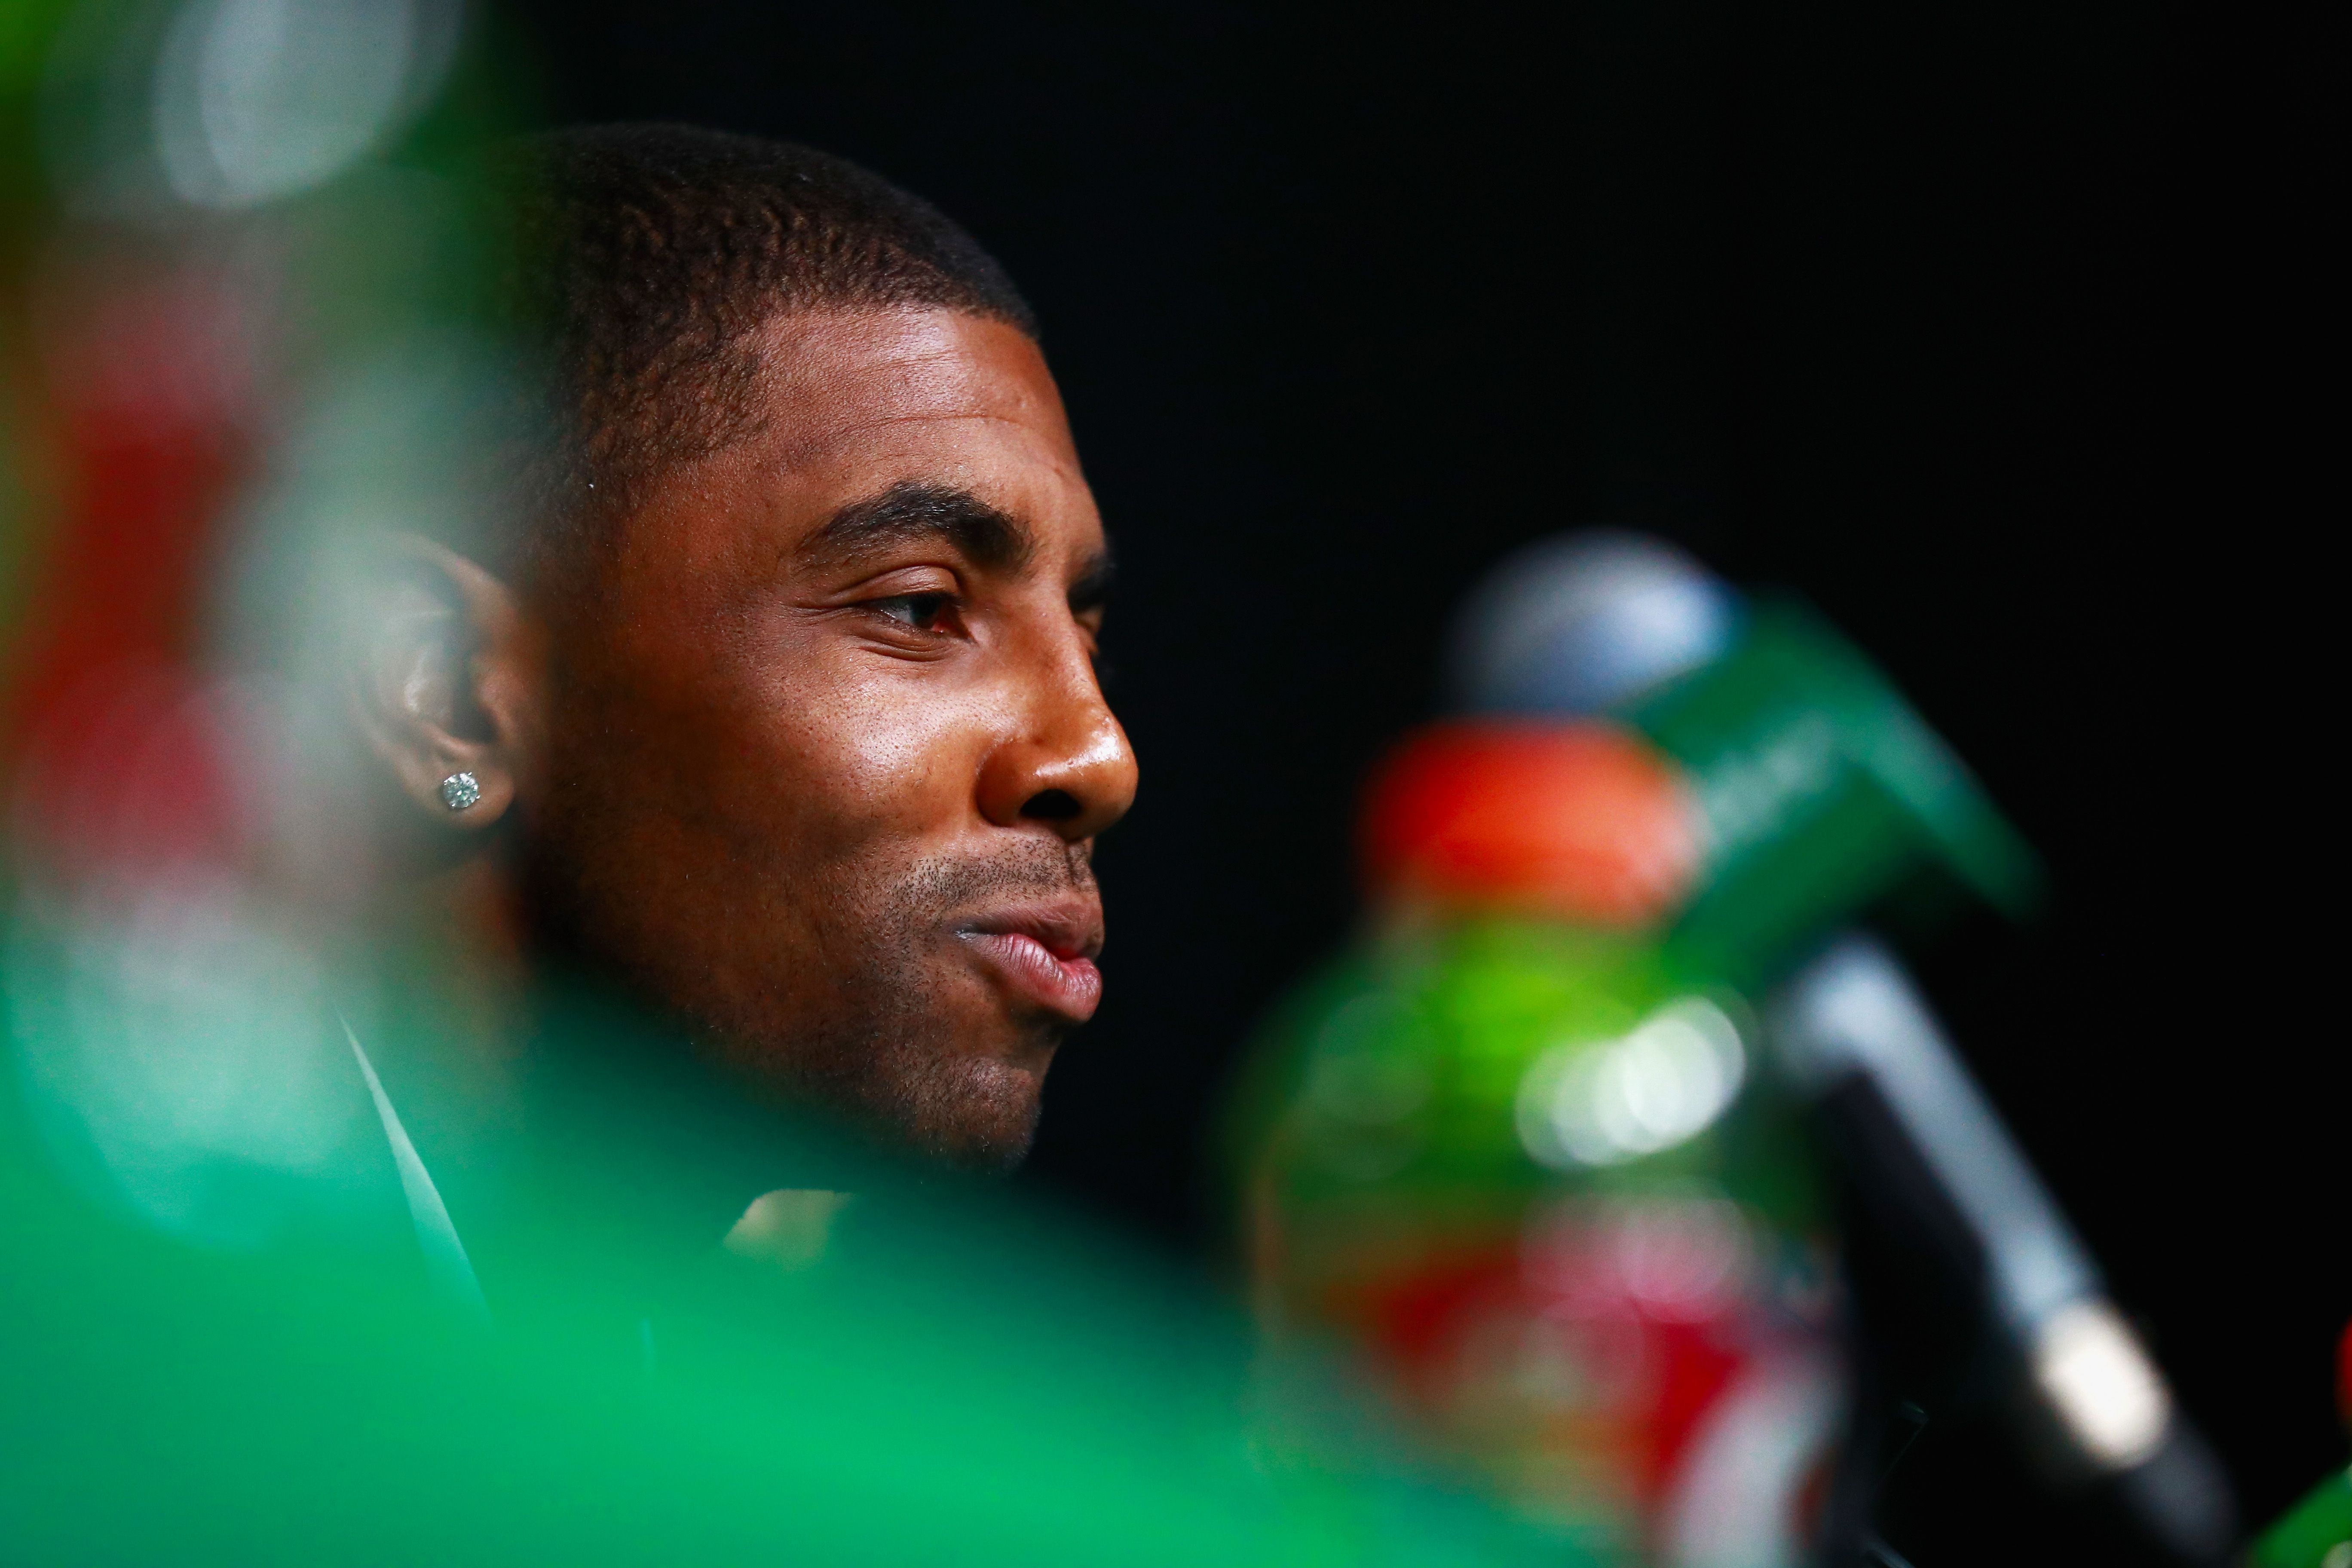 Boston Celtics: Kyrie Irving will be a dynamic force in Boston